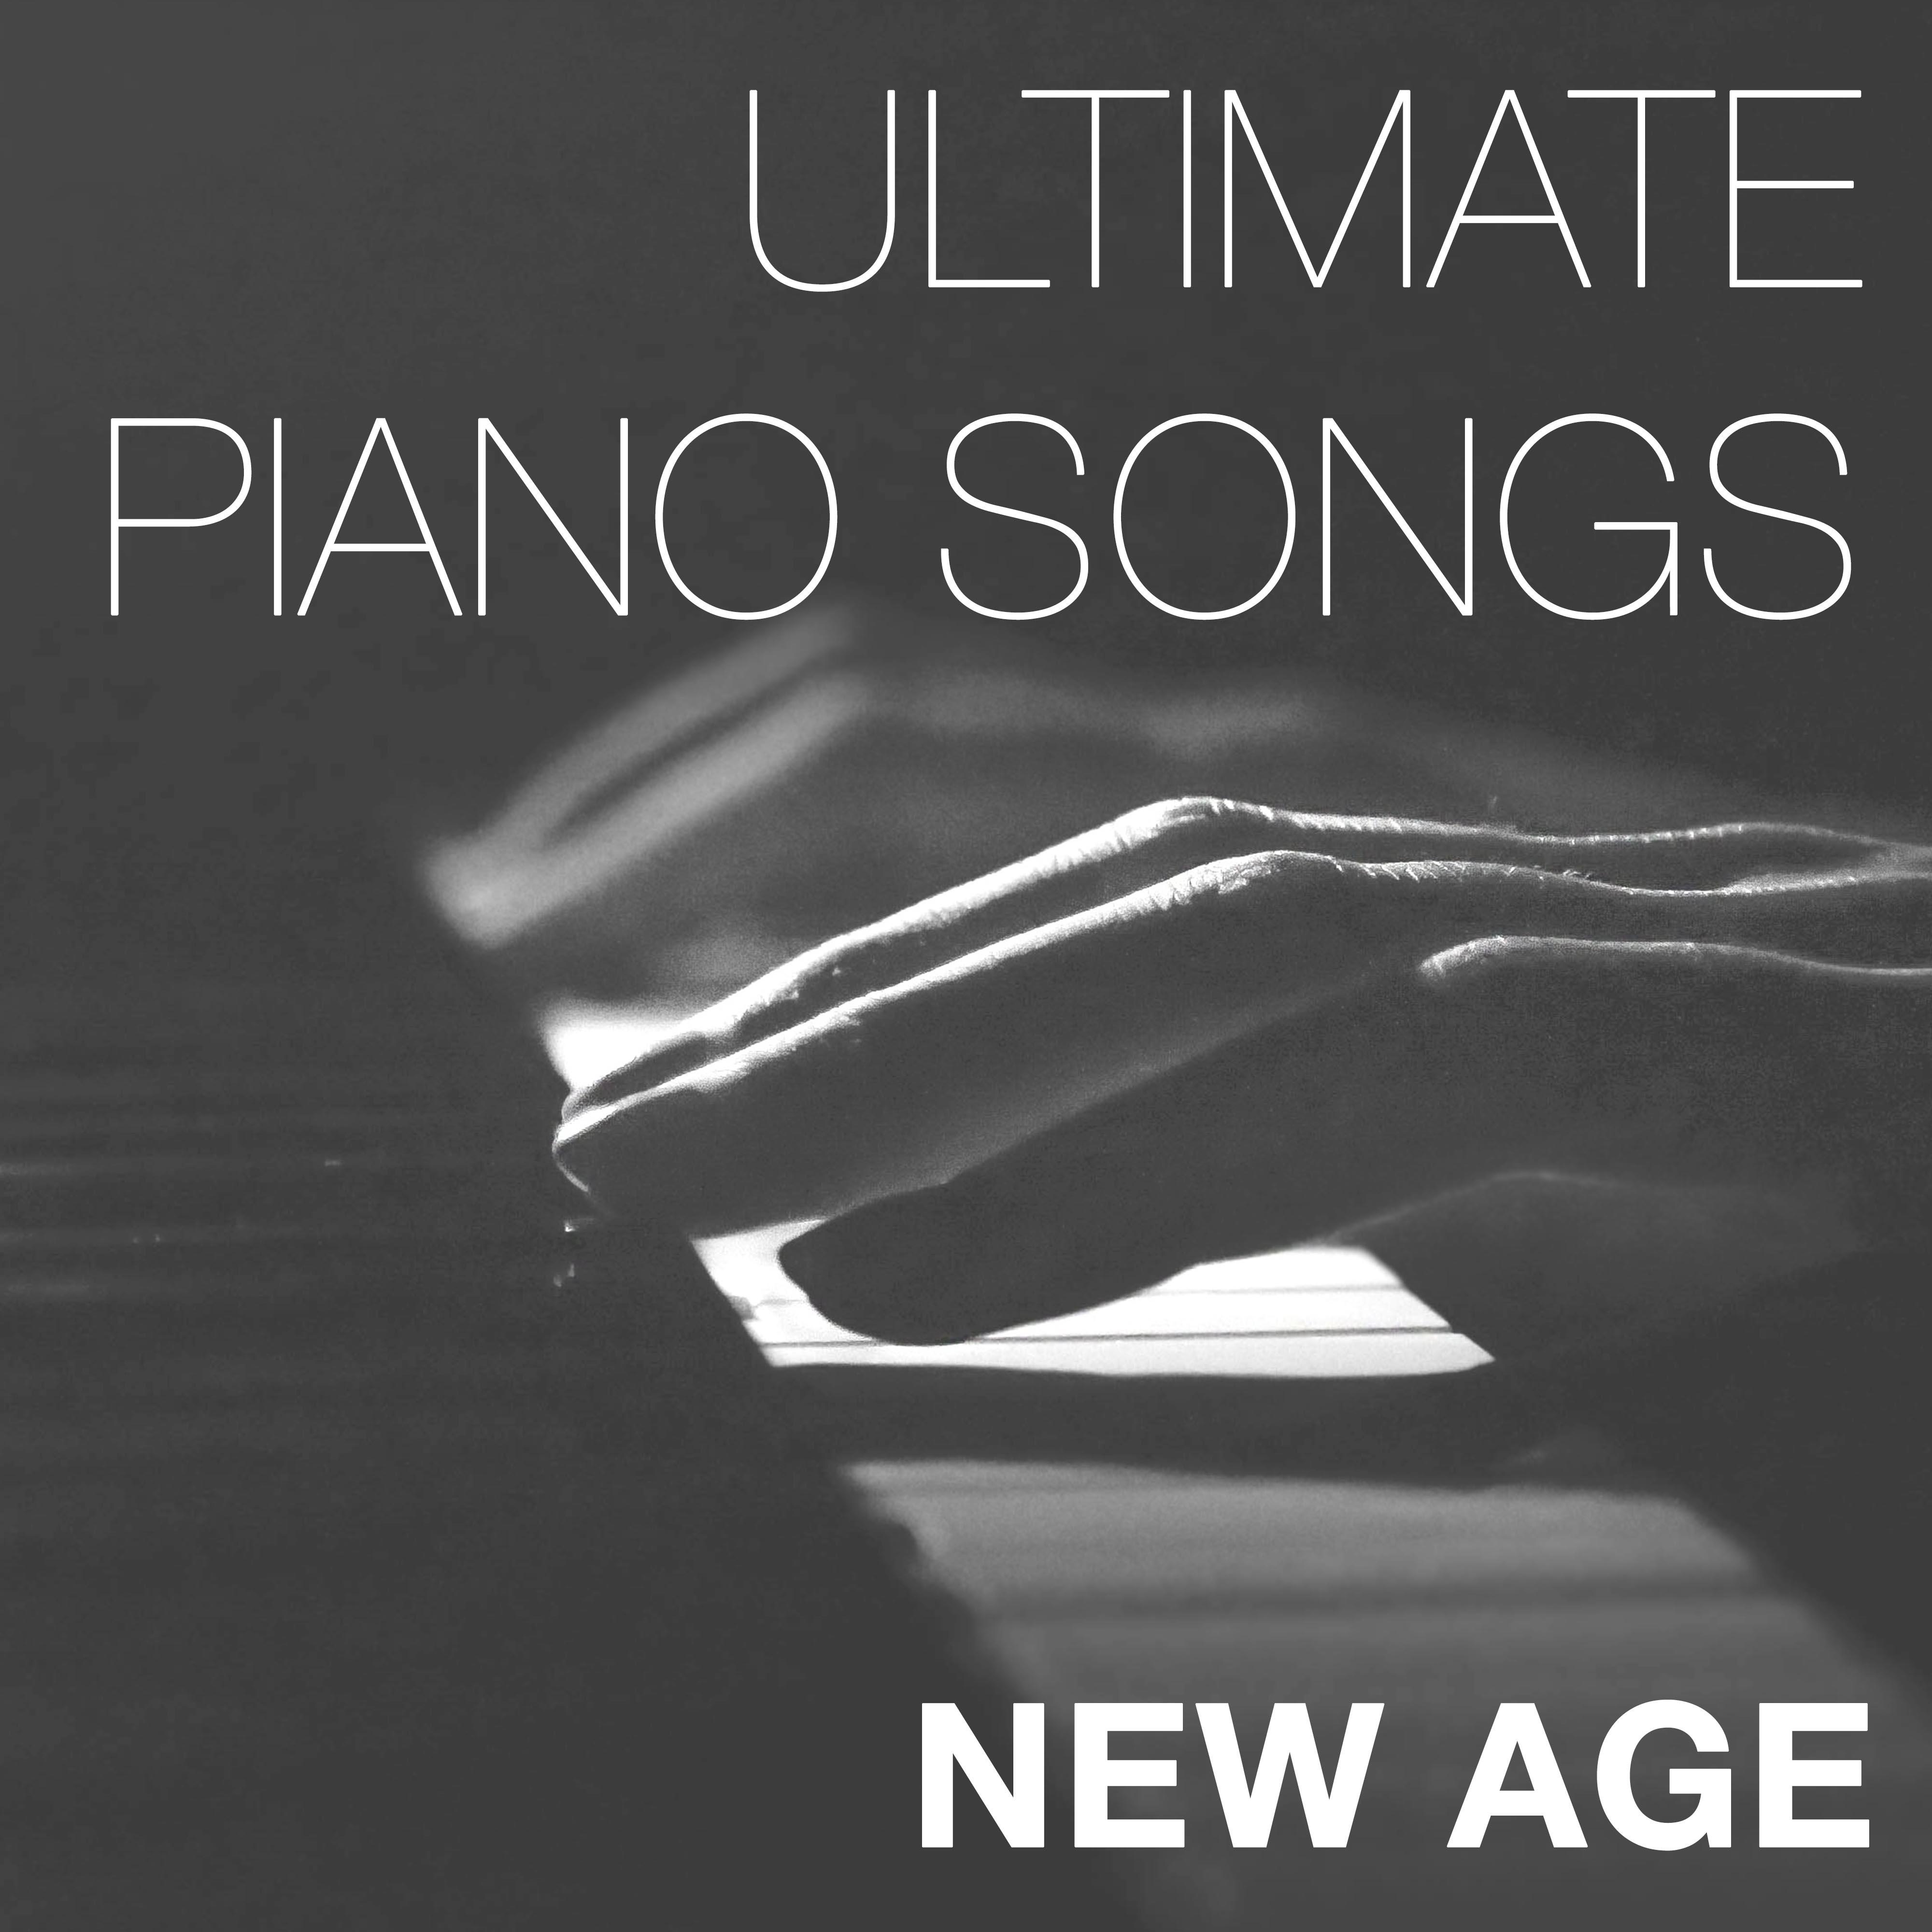 Ultimate Piano Songs: New Age Playlist with Nature Sound Effects including Rain, Wind and Ocean Waves, Oriental Zen Vibes for Inner Peace and Serenity in Life